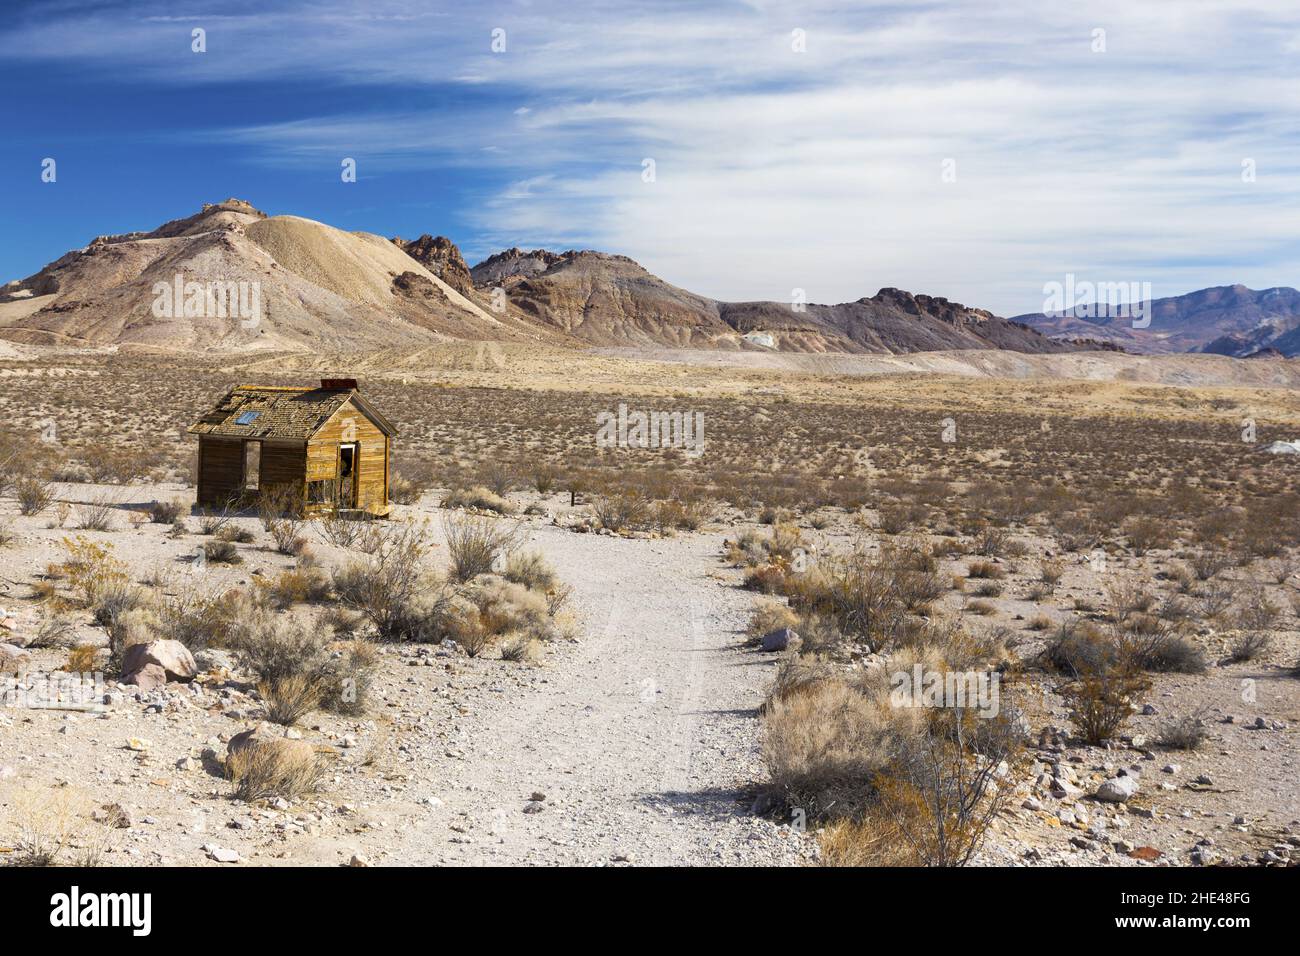 Isolated Ruins Old Wooden Vintage Log Cabin Scenic Desert Landscape Distant Mountain Peaks. Historical Rhyolite Ghost Town Death Valley National Park Stock Photo